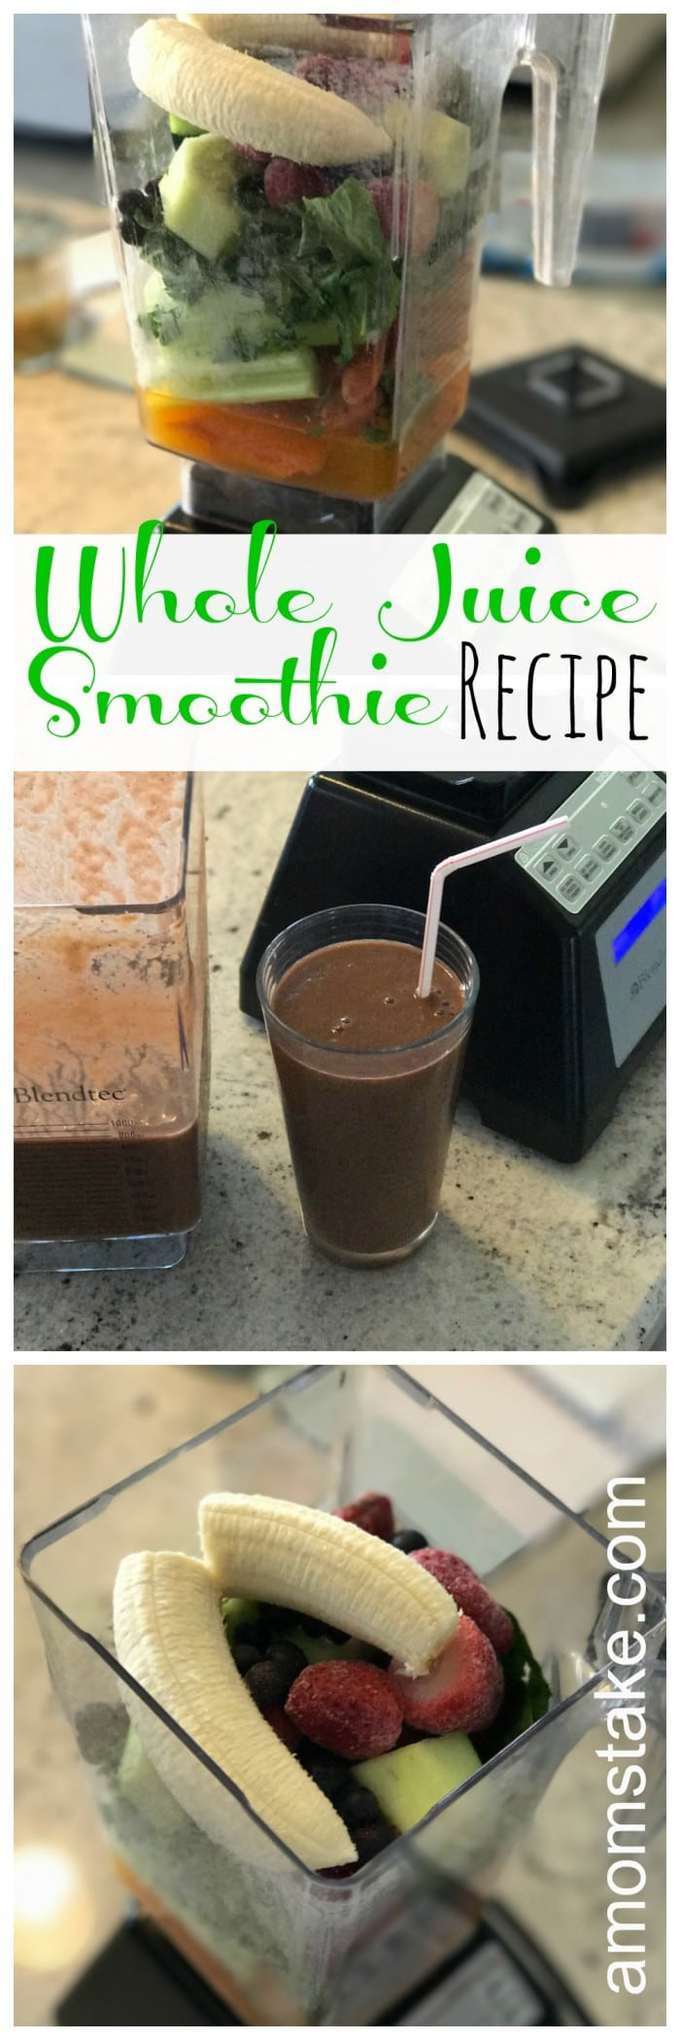 Try a whole juice smoothie today. This recipe is wonderful! It’s my new favorite go-to meal when I want something healthy but don’t have time to spend making a meal.